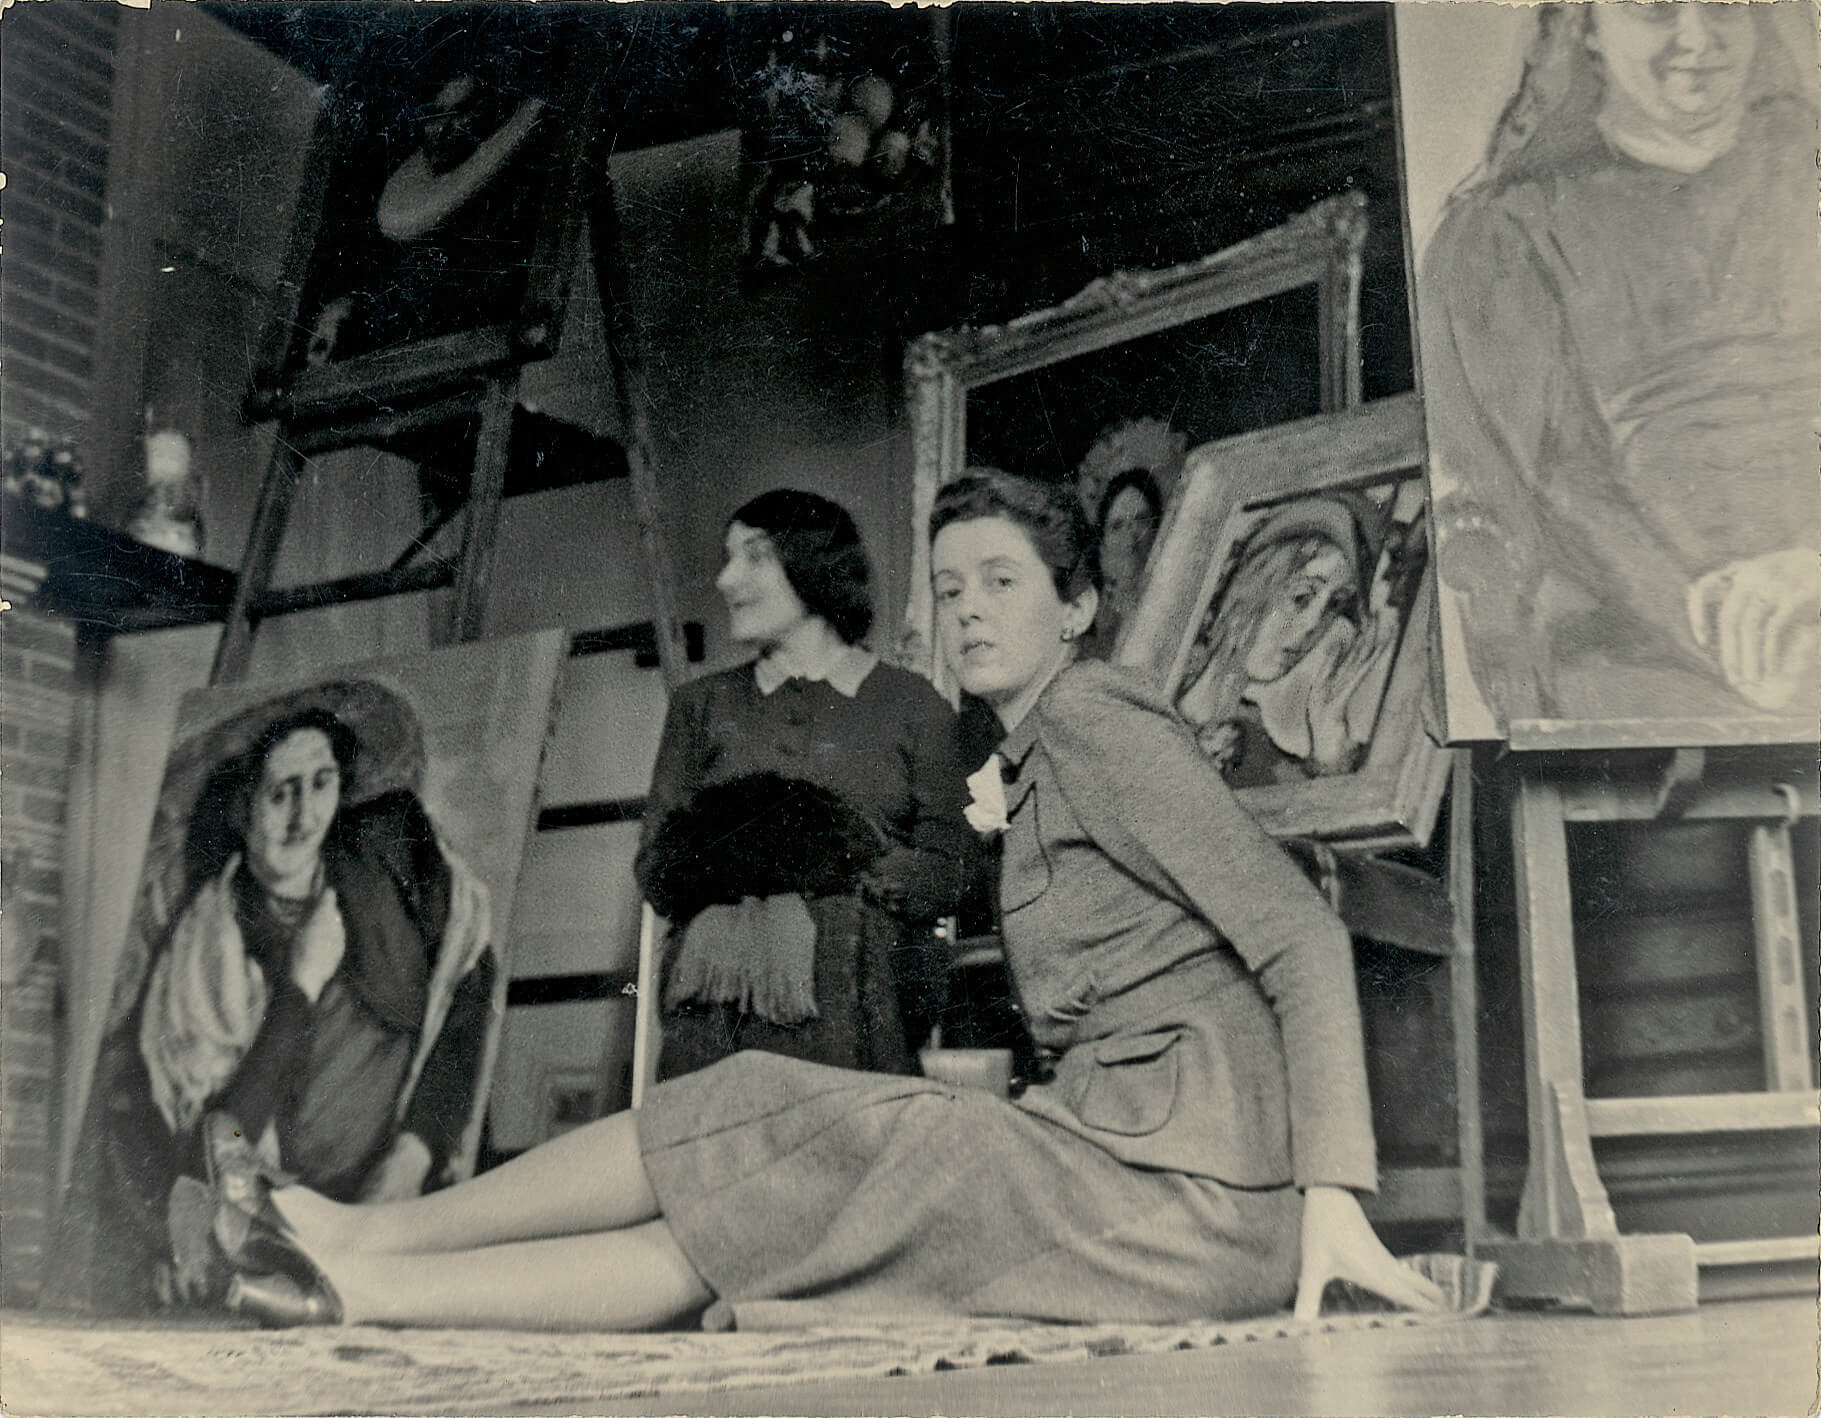 Marie-Louise von Motesiczky and Veza Canetti in the studio at Cornerways, early 1940s, Marie-Louise von Motesiczky Archive, Tate Archives, London 